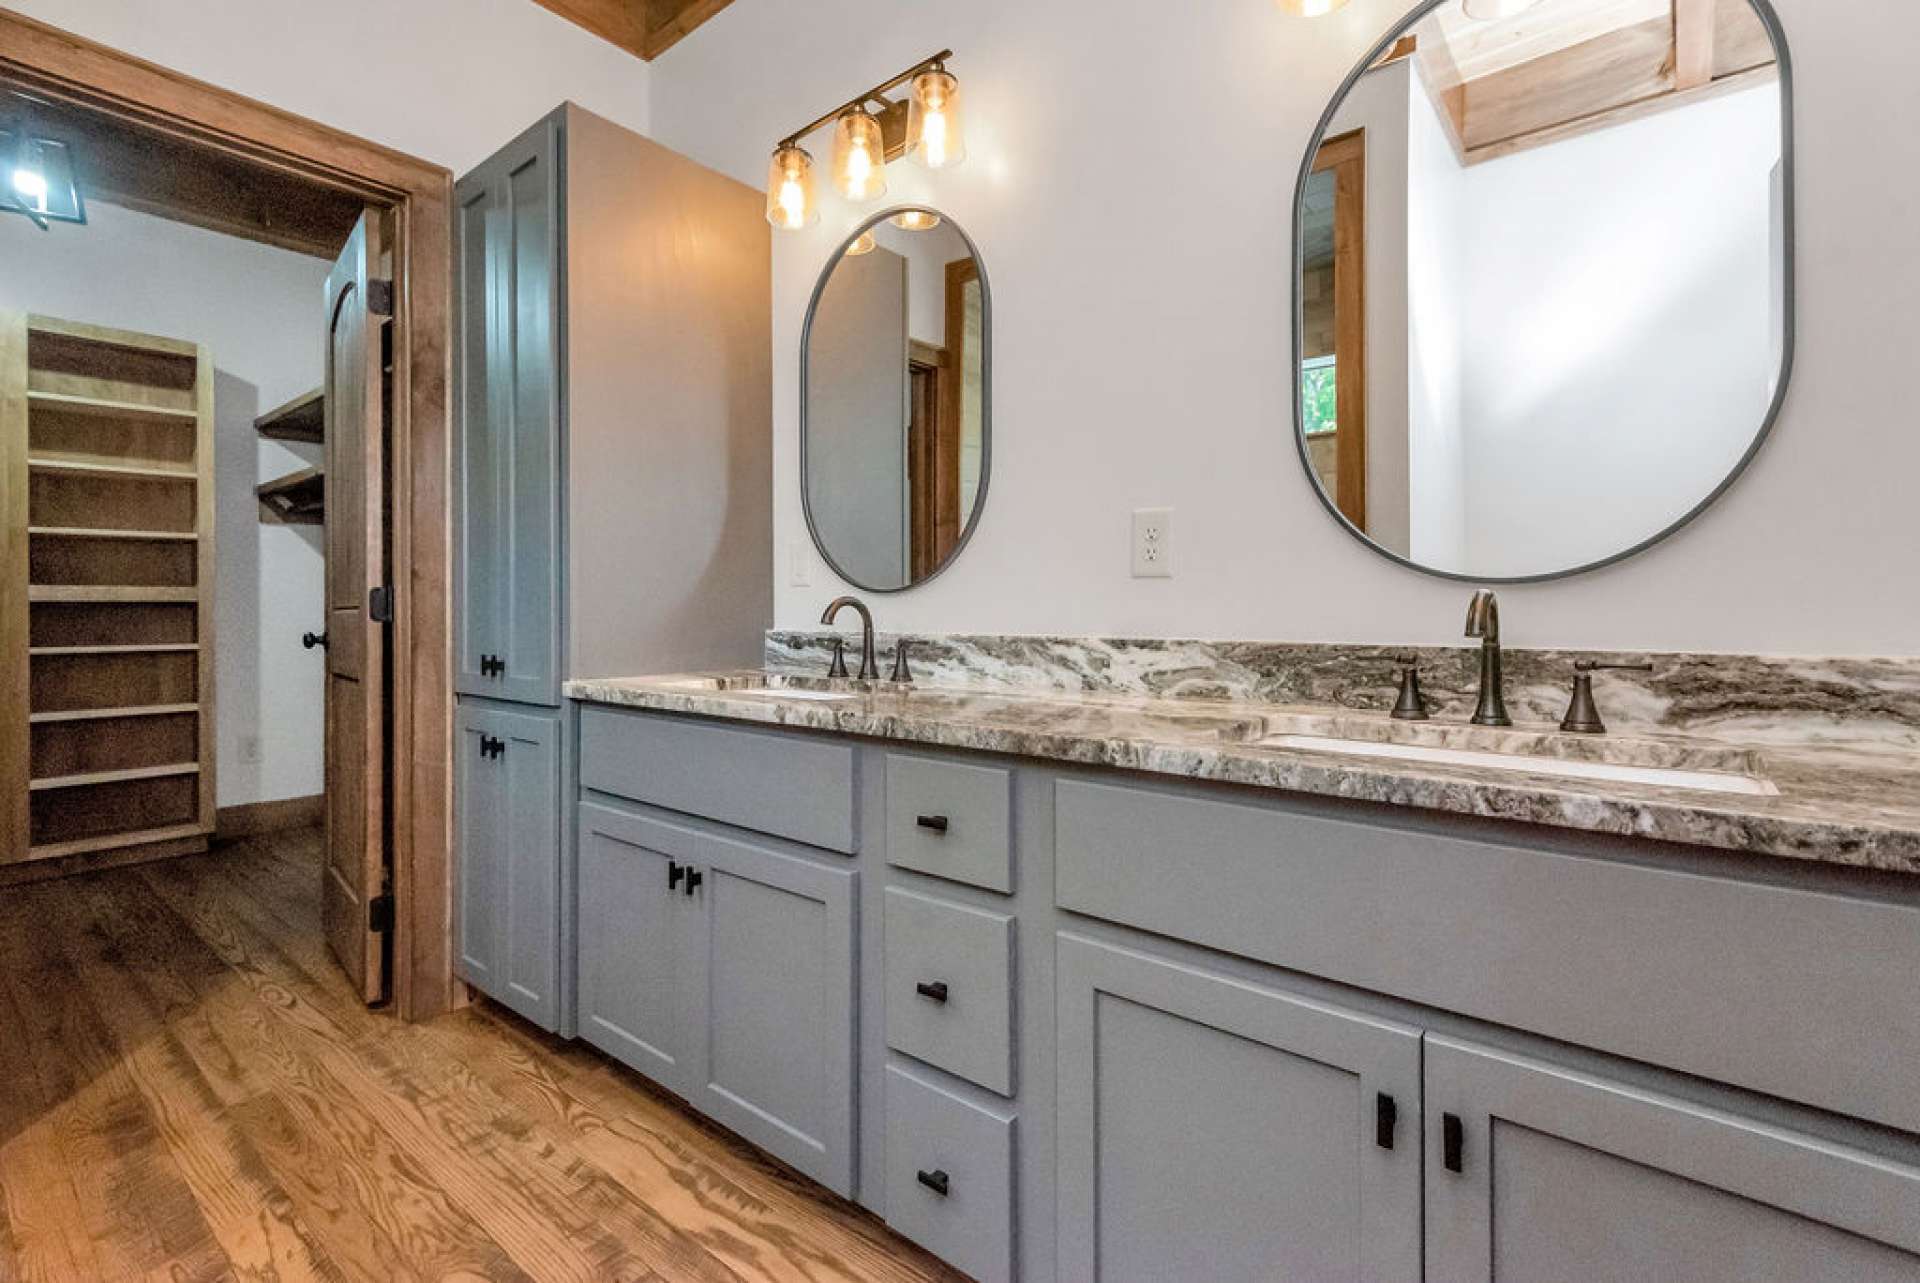 Master bath offers 7' double vanity with granite top...